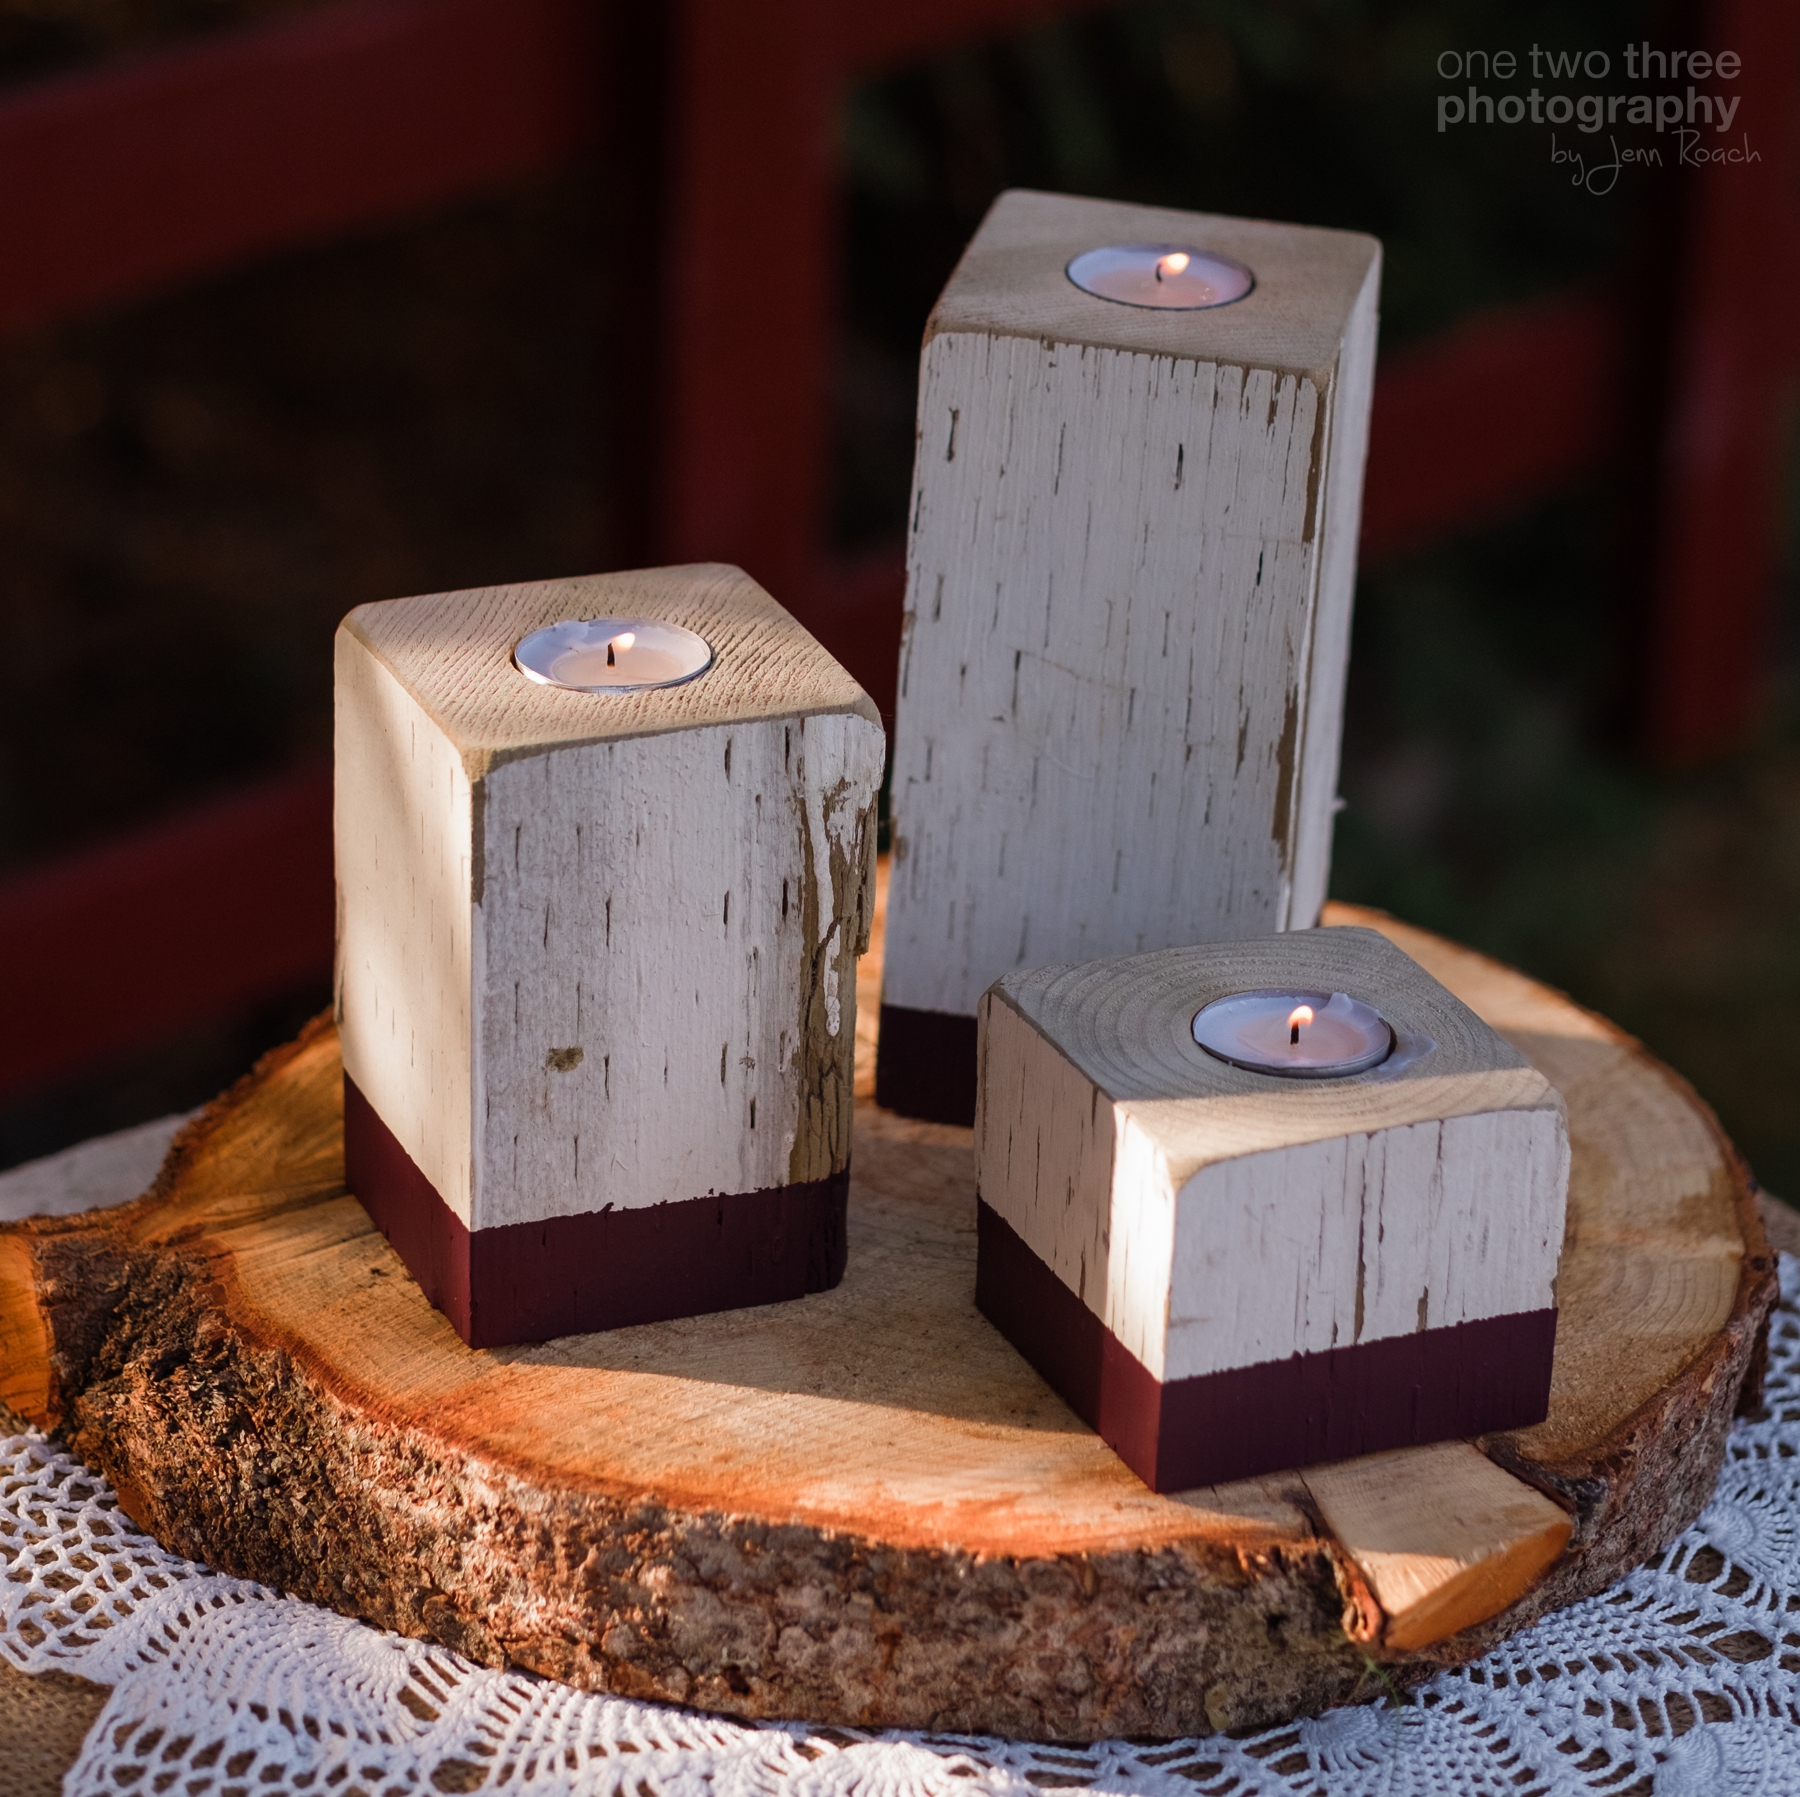 Rustic recycled and reclaimed tea light candleholders